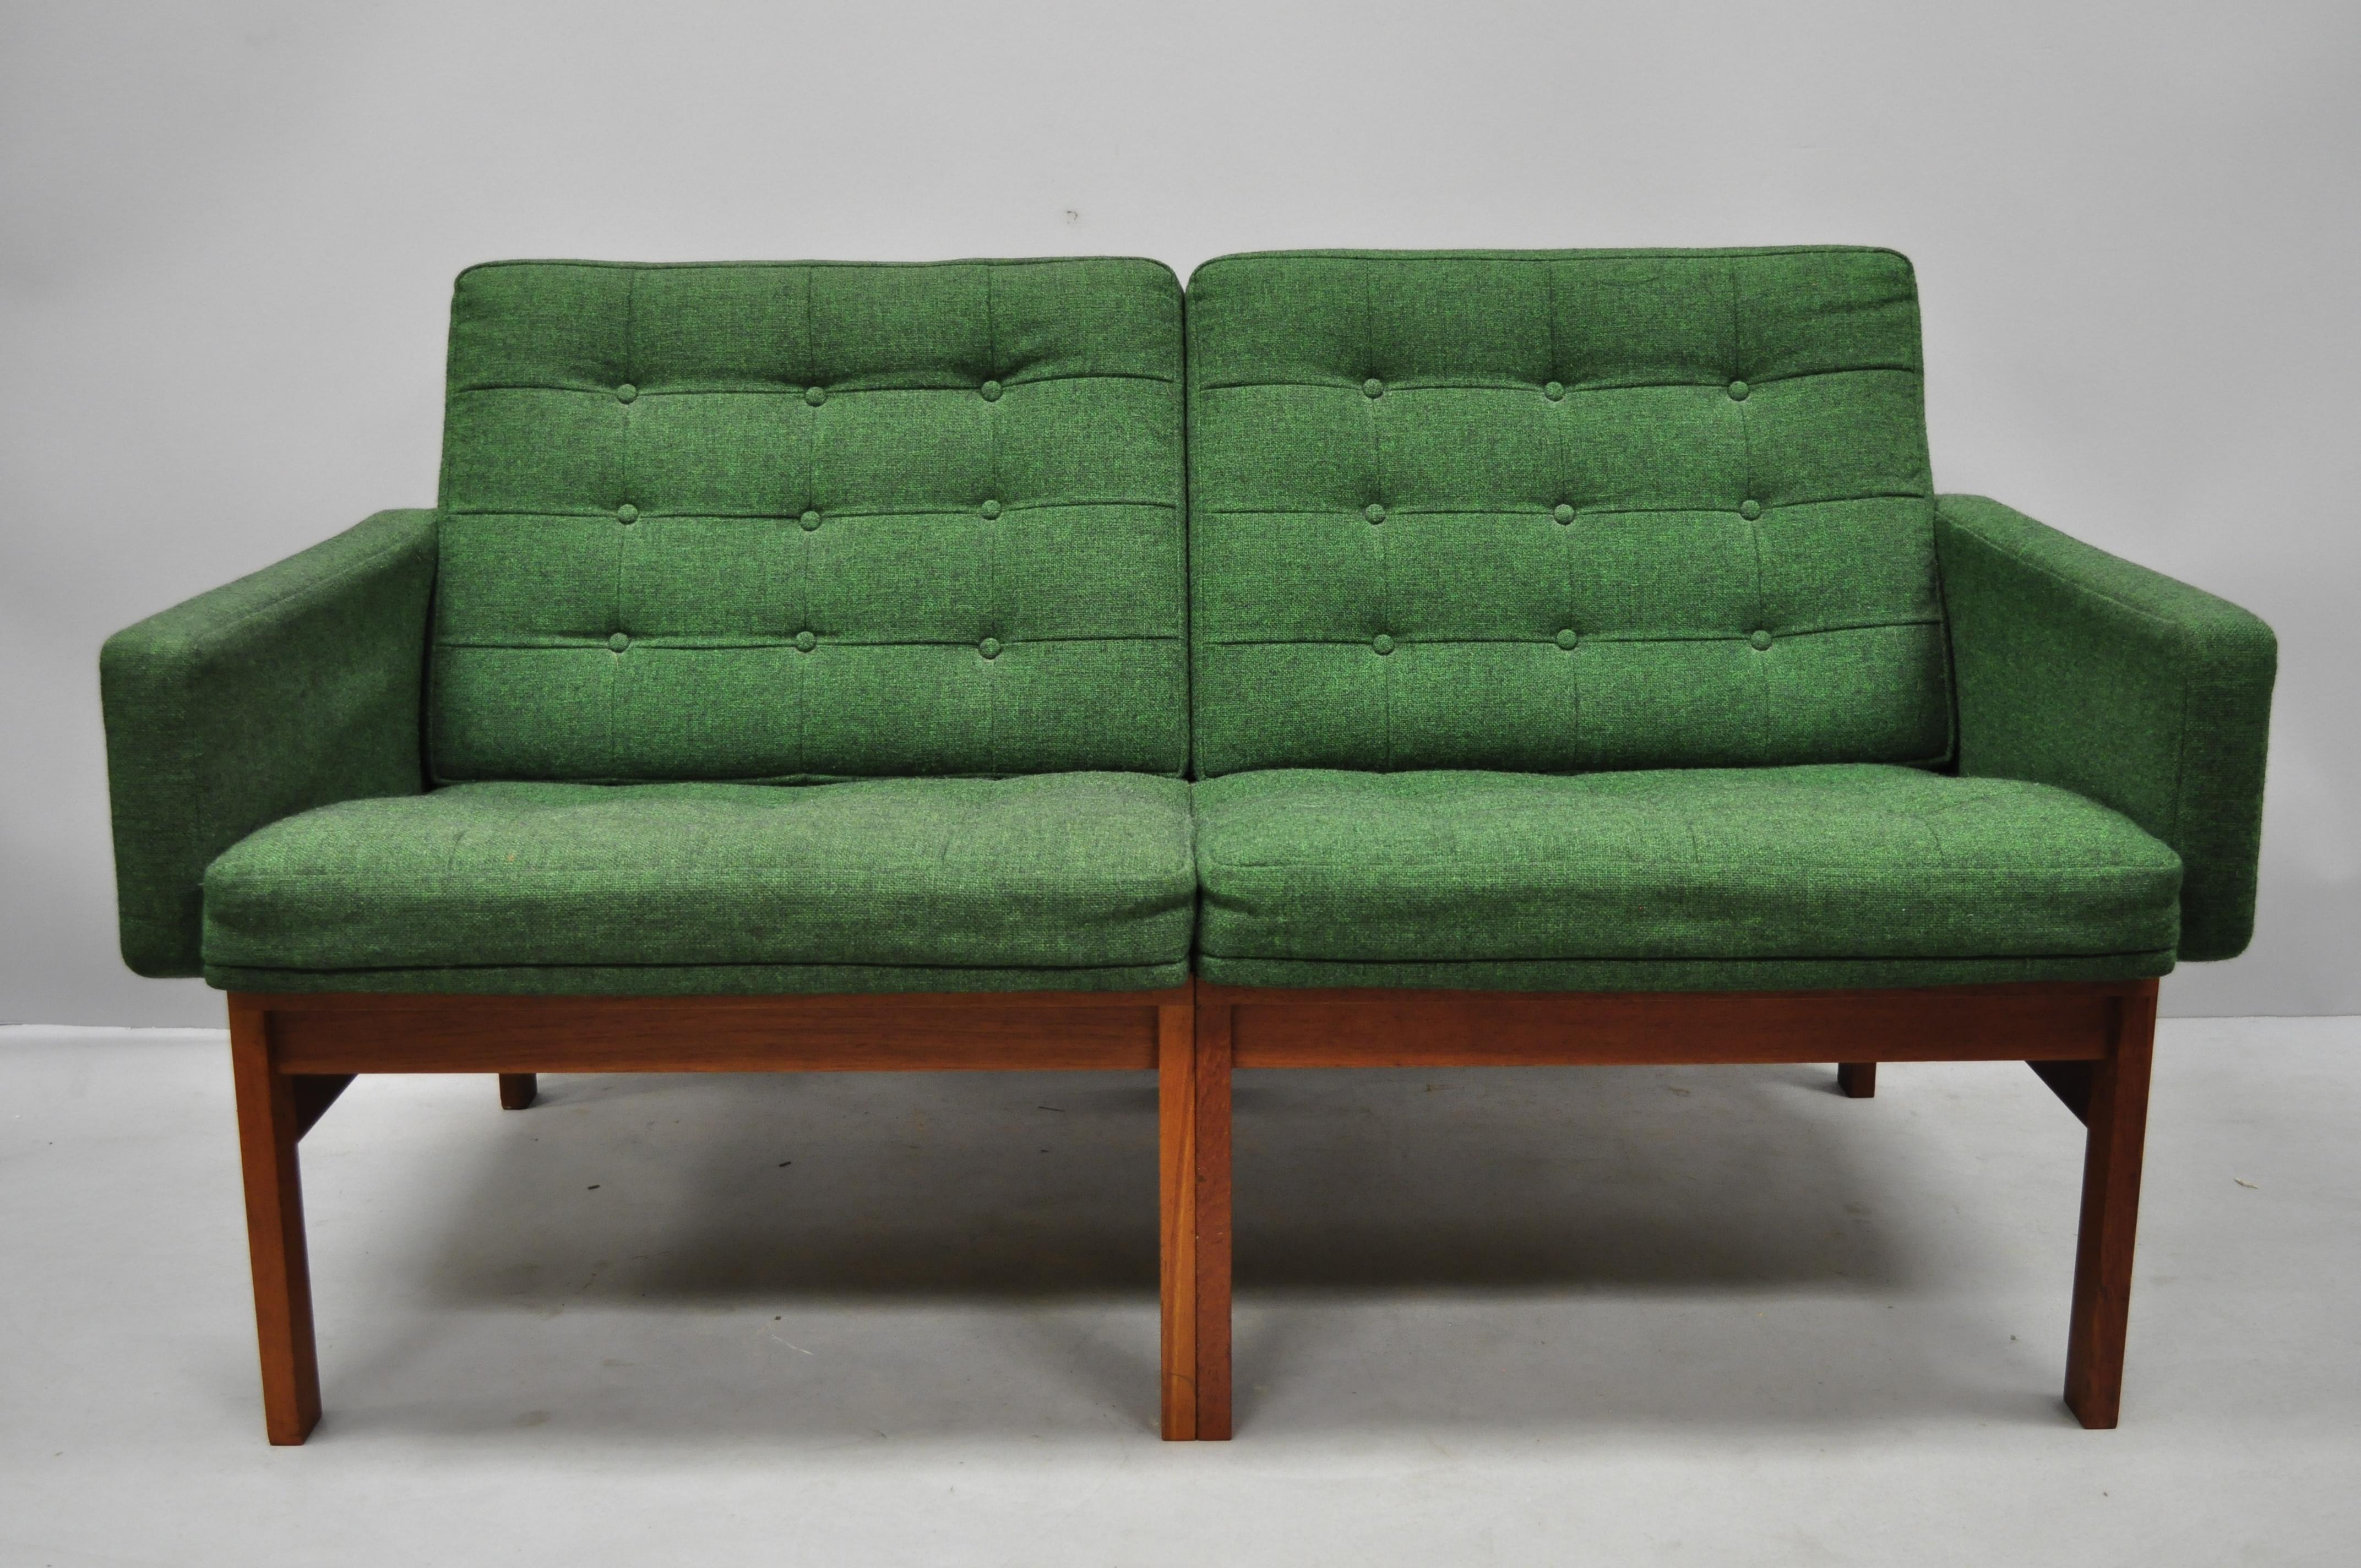 Gjerlov Knudsen & Torben Lind for France & Son green teak Moduline loveseat sofa. Item features original green button tufted upholstery, exposed joinery, solid wood construction, beautiful wood grain, original label, clean modernist lines, circa